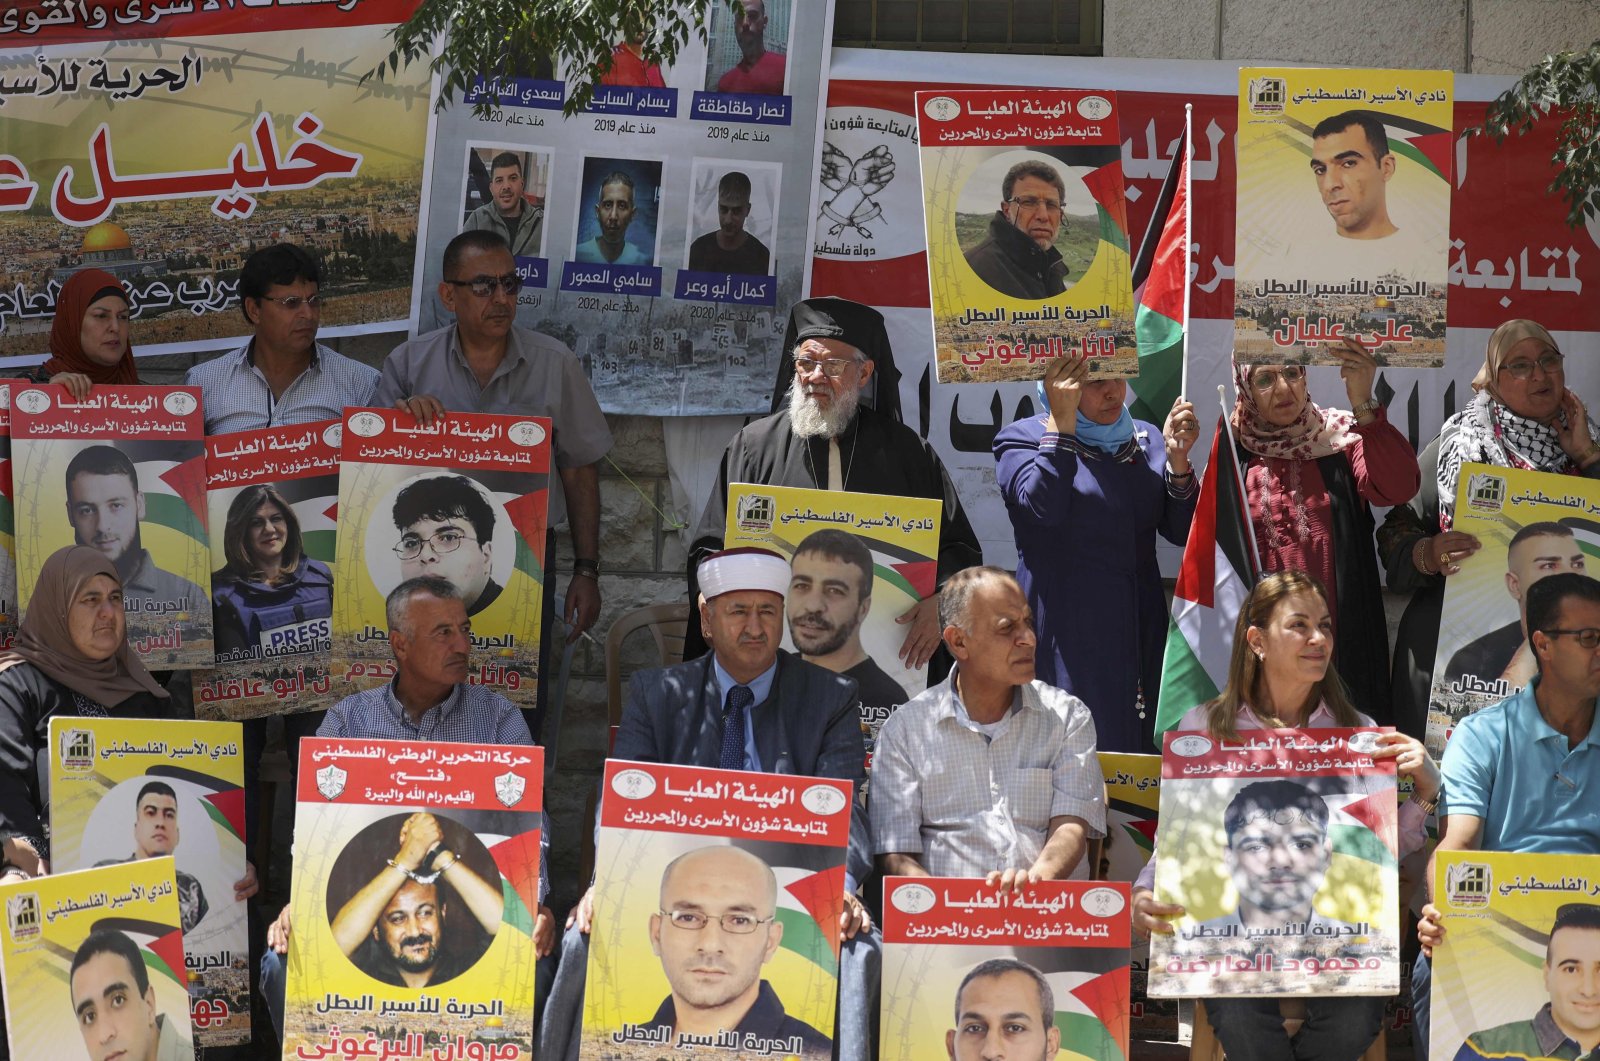 Protesters, including an Orthodox Christian priest (back C) and Muslim imam (front C), lift placards during a demonstration in front of the Red Cross in support of Palestinians detained in Israeli prisons, Ramallah city, occupied West Bank, Palestine, June 14, 2022. (AFP Photo)